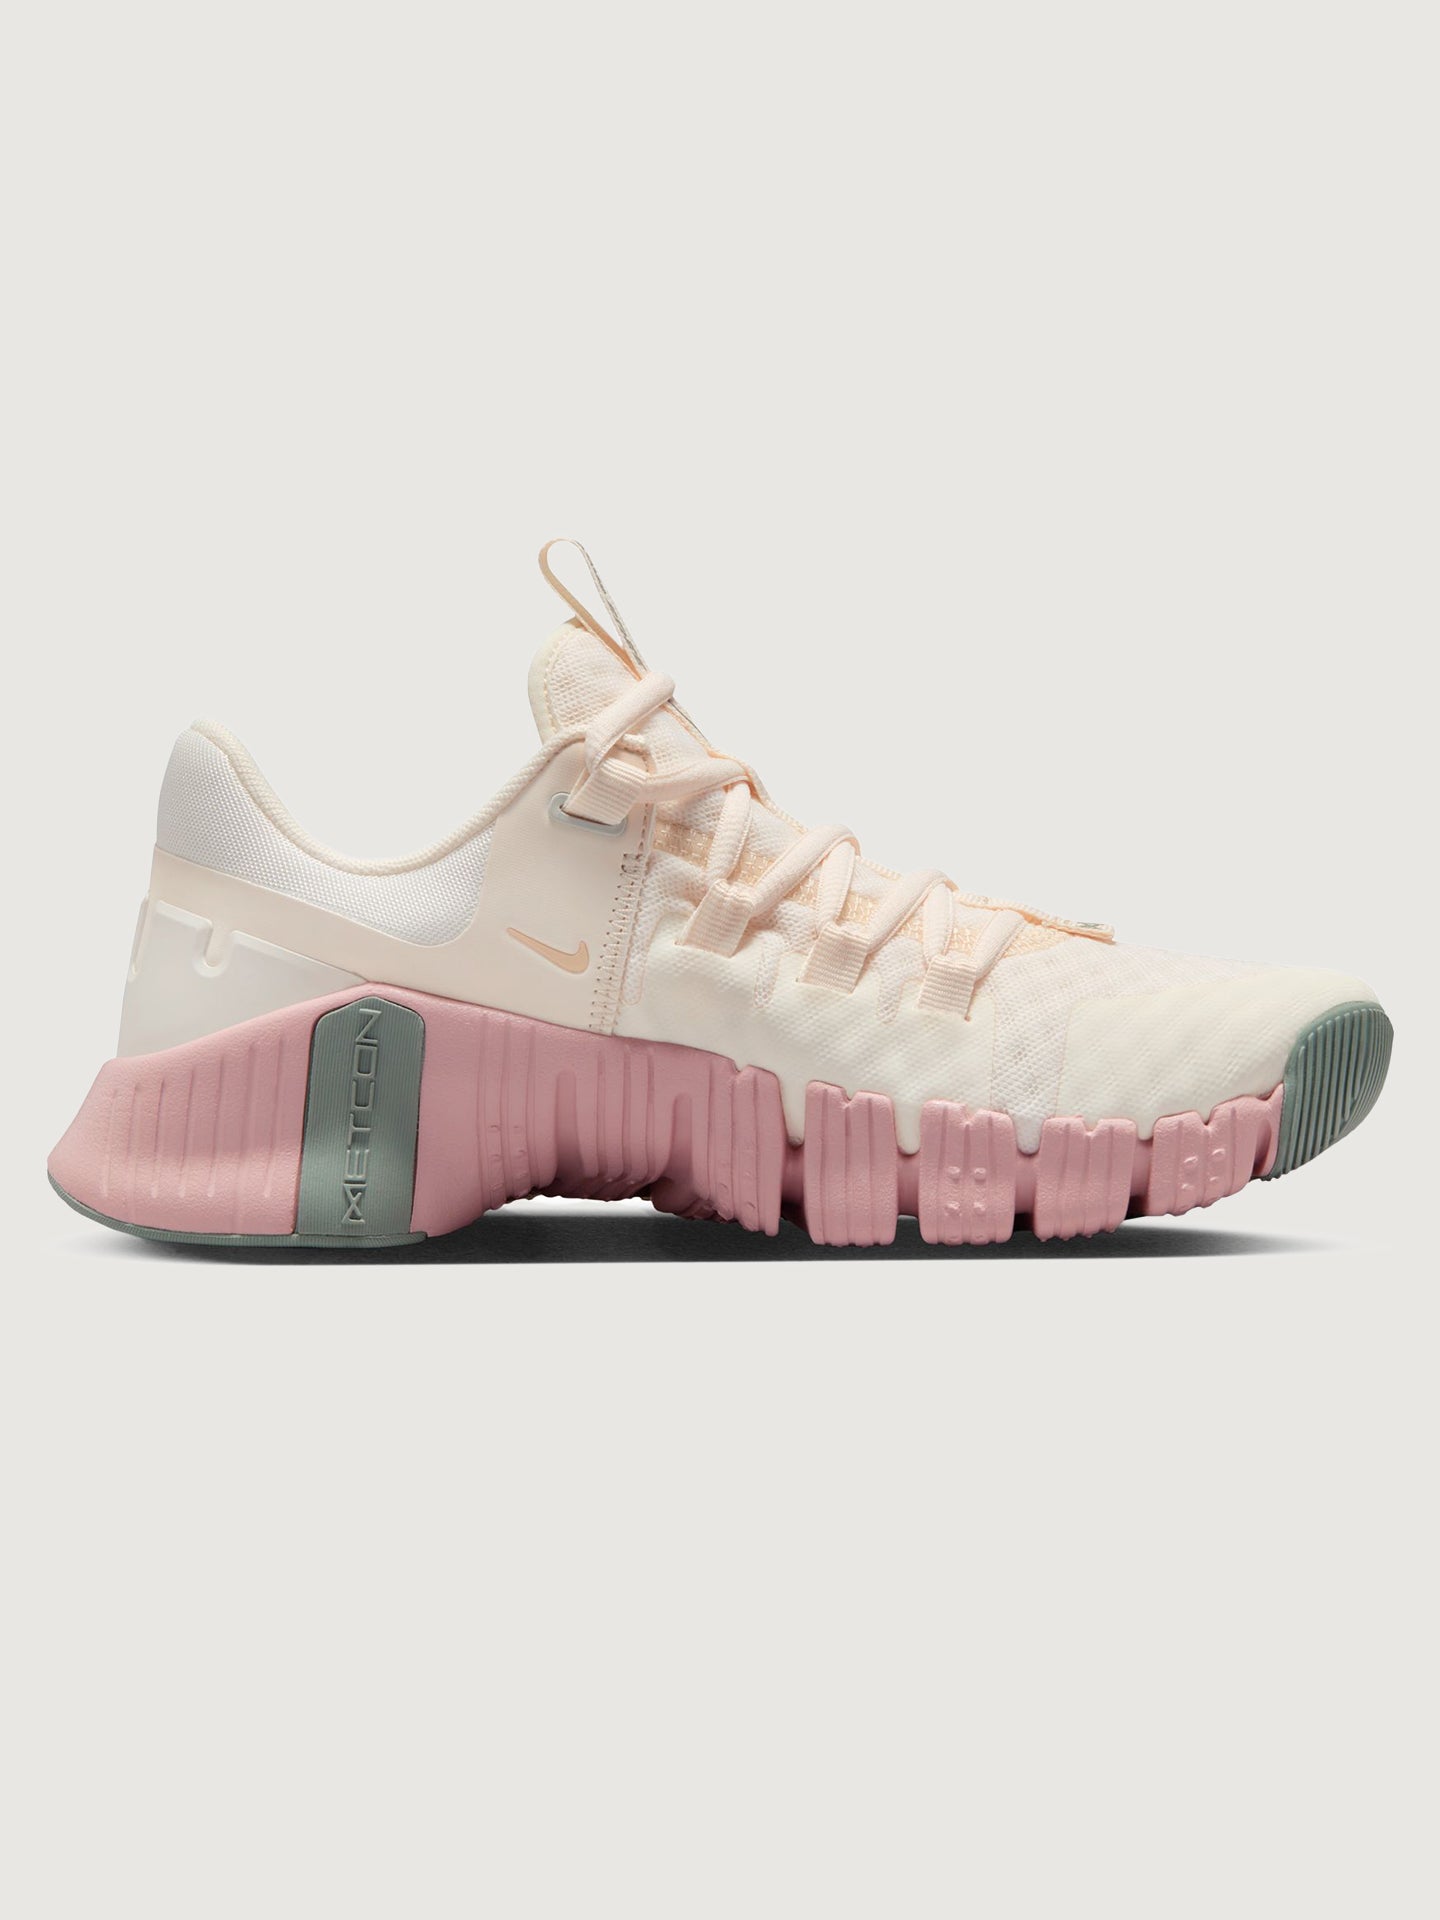 Nike Free Metcon 5 - Pale Ivory/Ice Peach-Light Silver – Carbon38